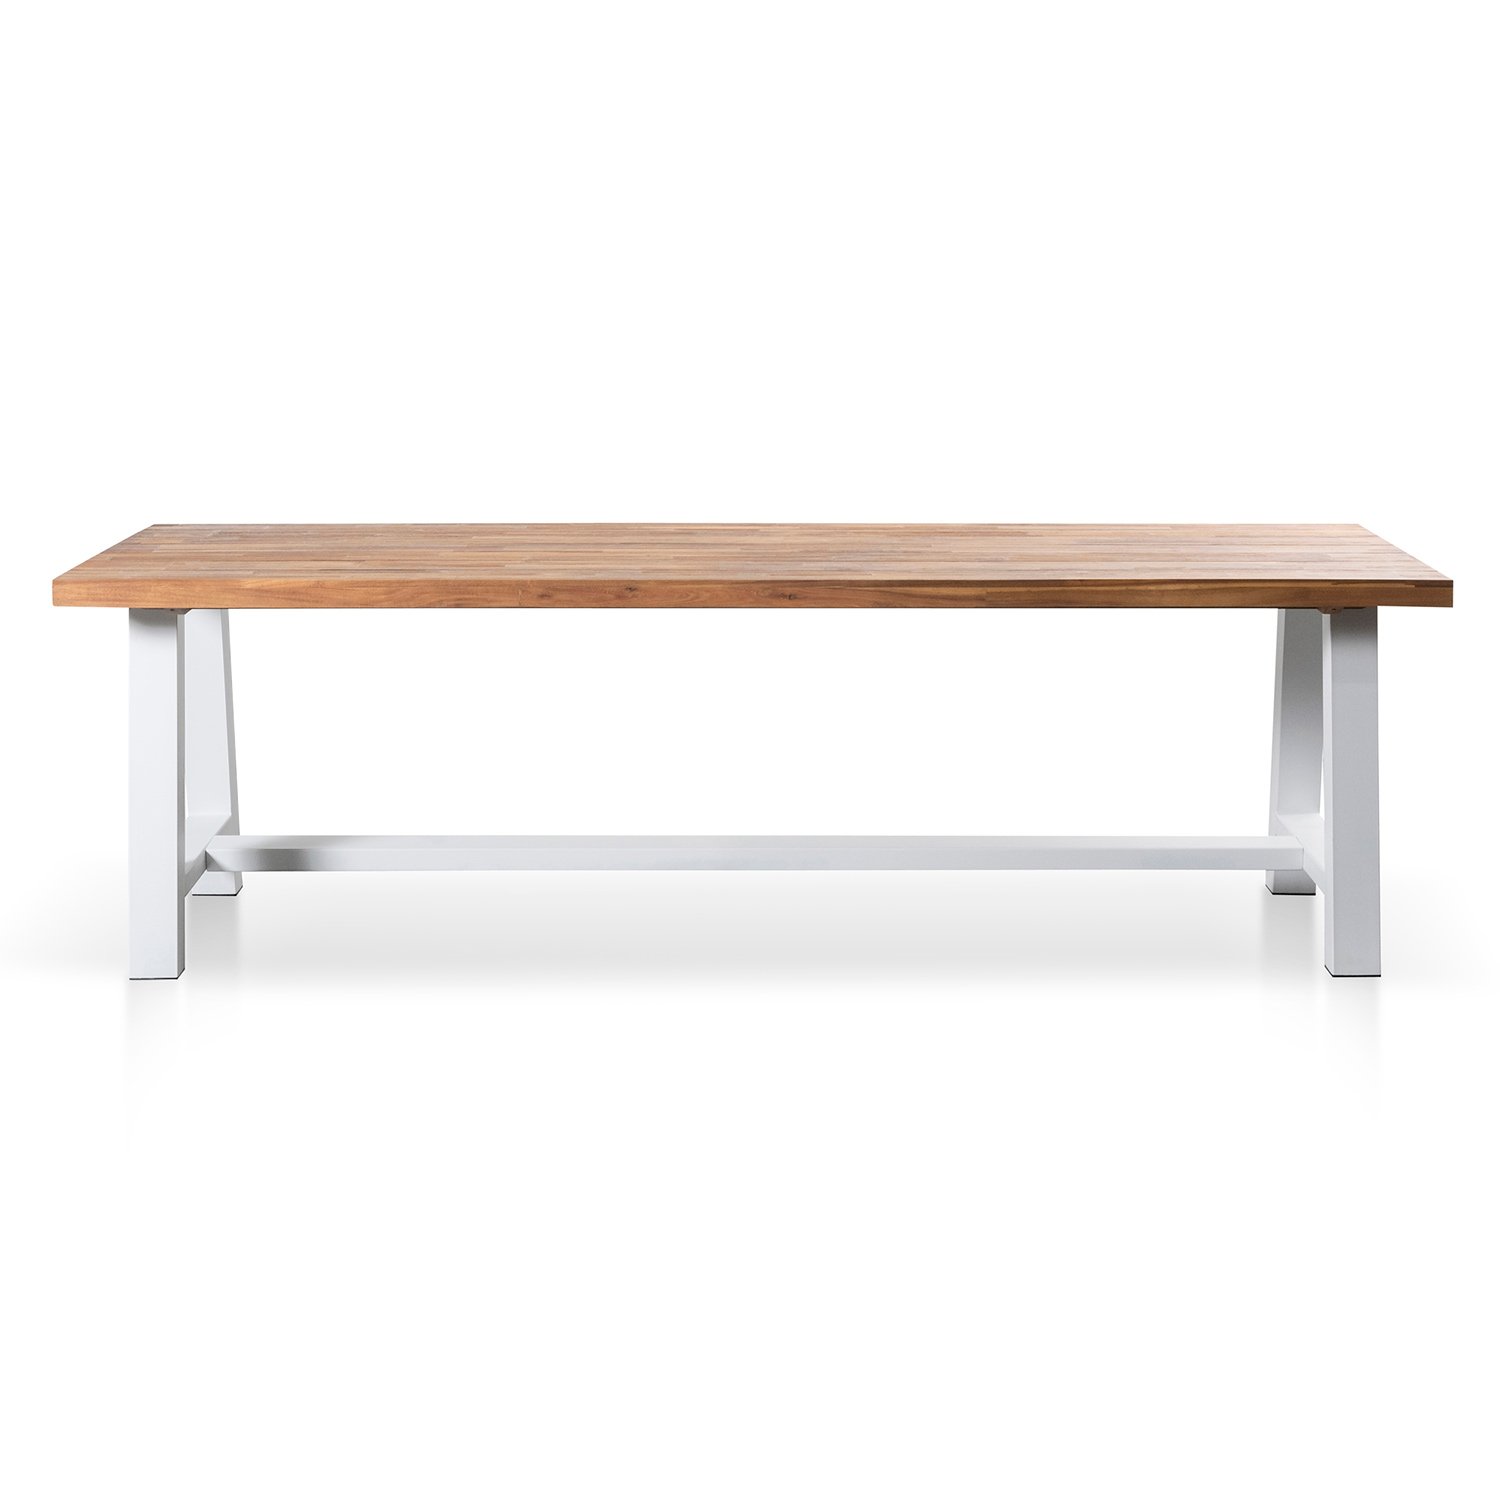 Nemo 2.5m Outdoor Dining Table - Natural Top and White Base - Dining Tables